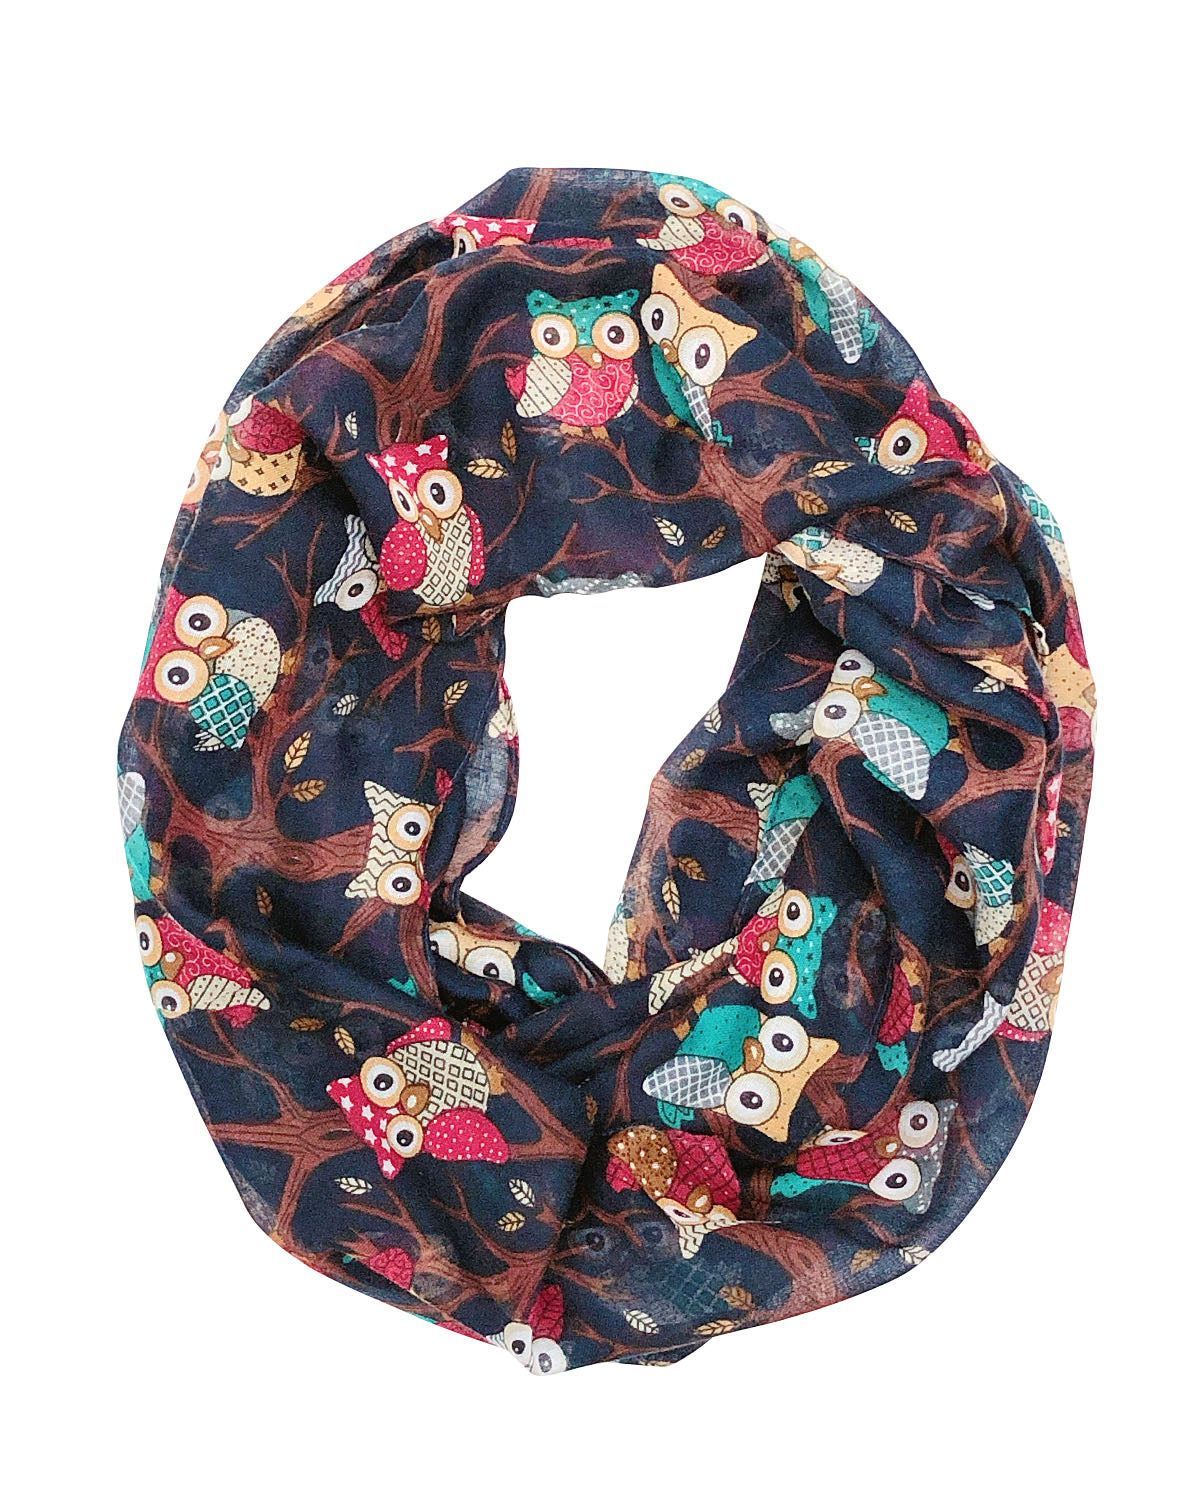 Wrapables Lightweight Forest Animal Infinity Scarf, Fox, Owl, Moose Print Scarf